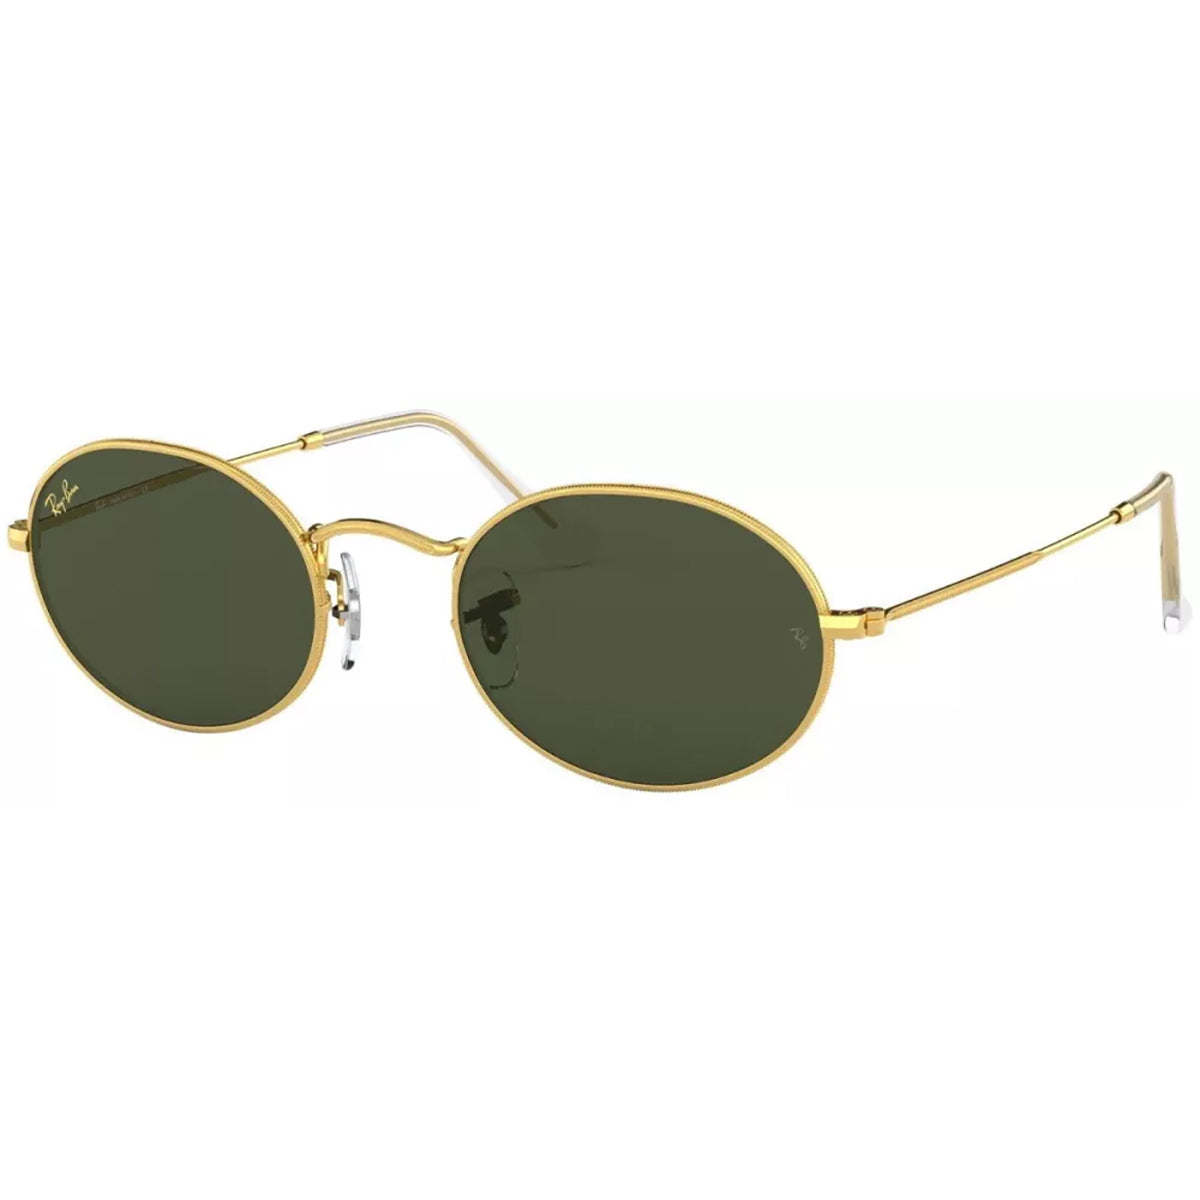 Ray-Ban Oval Men's Wireframe Sunglasses-0RB3547